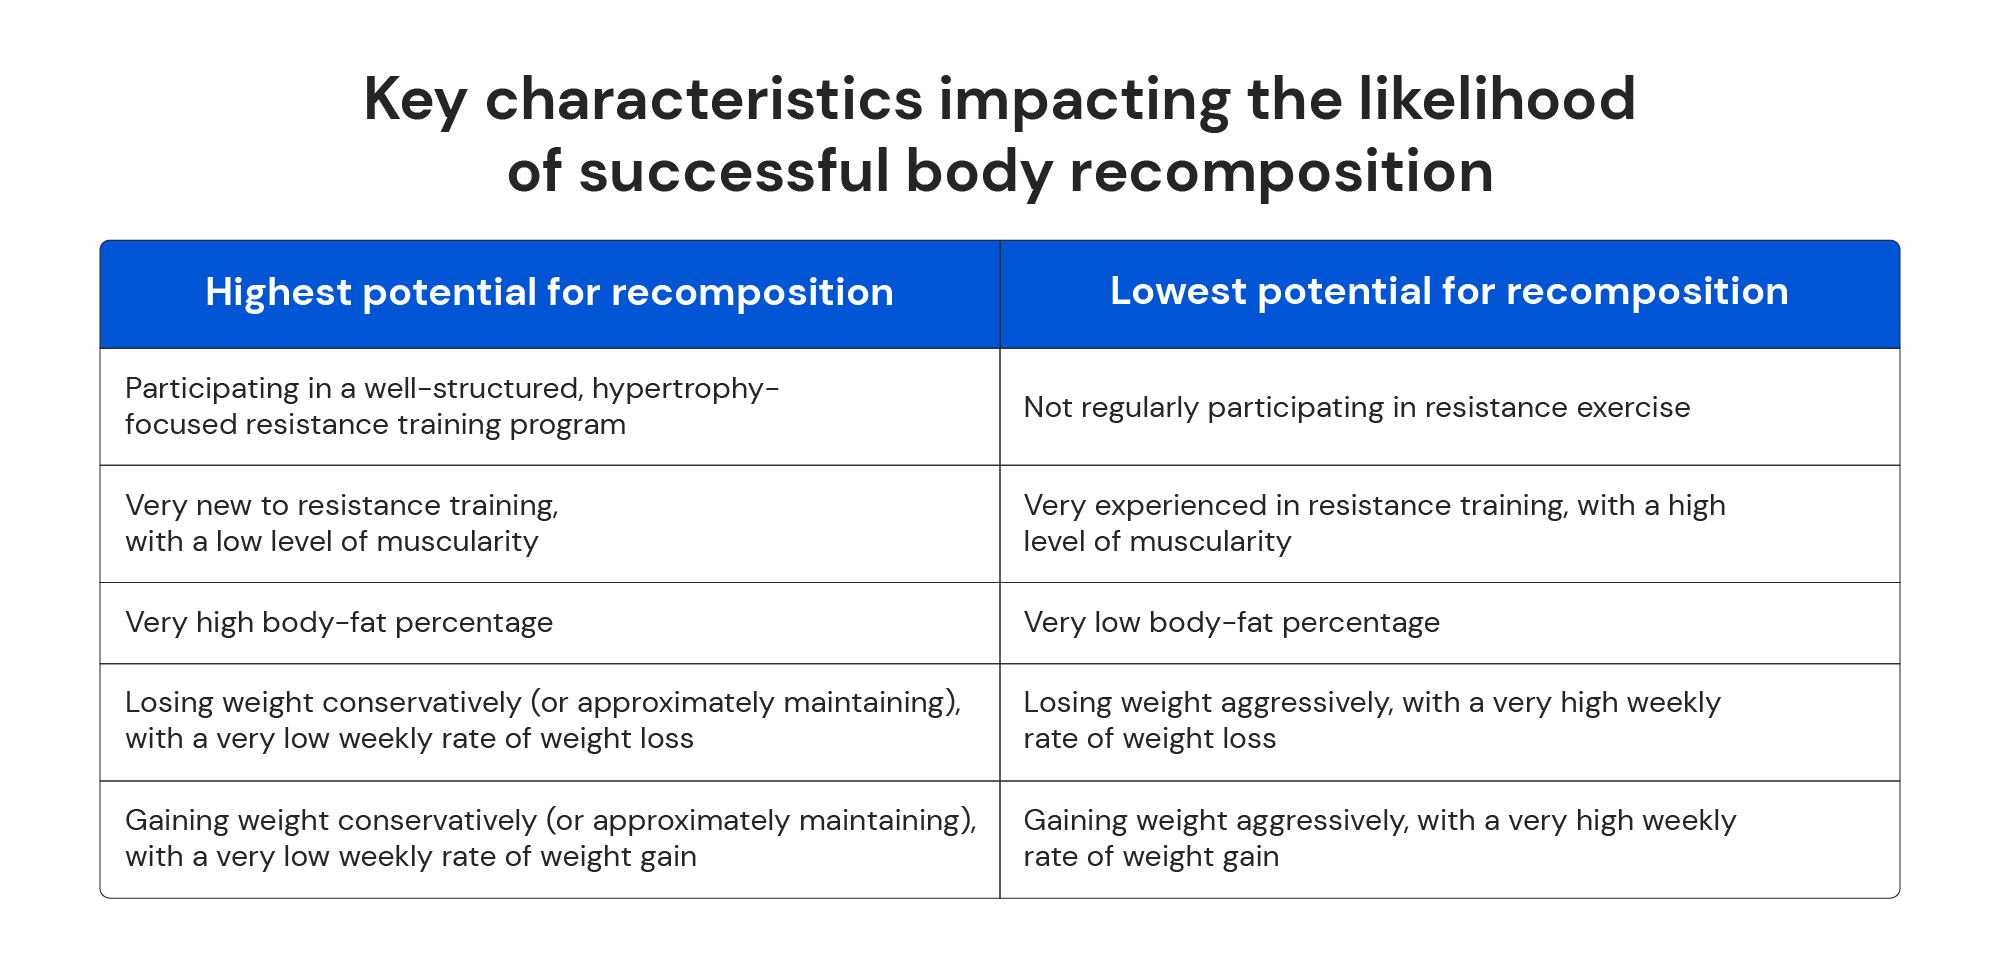 Key characteristics impacting the likelihood of successful body recomposition 